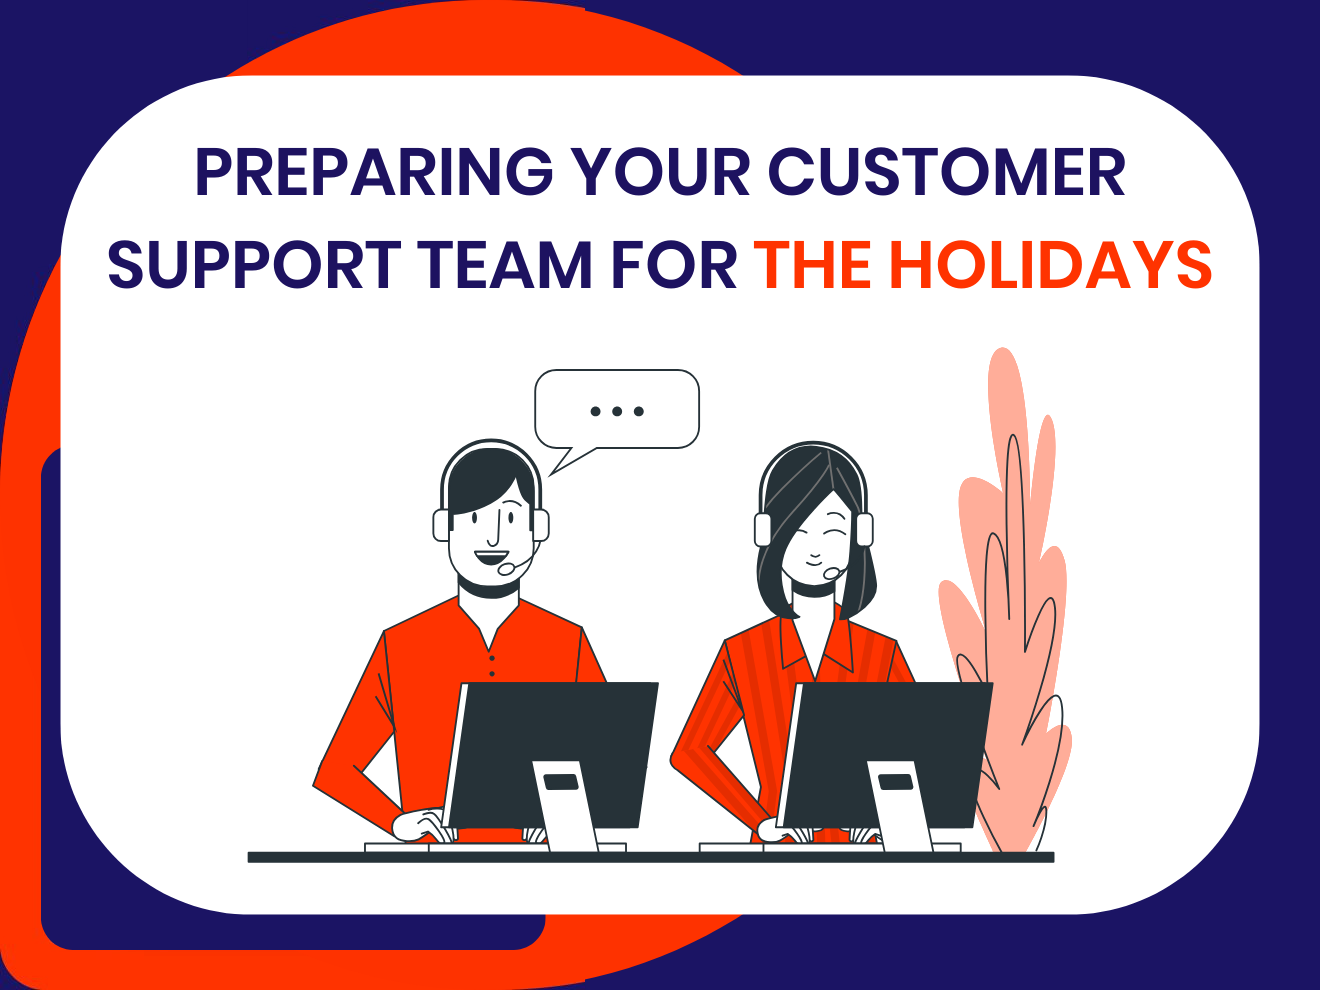 How to Prepare your Customer Support Team Before the Holidays